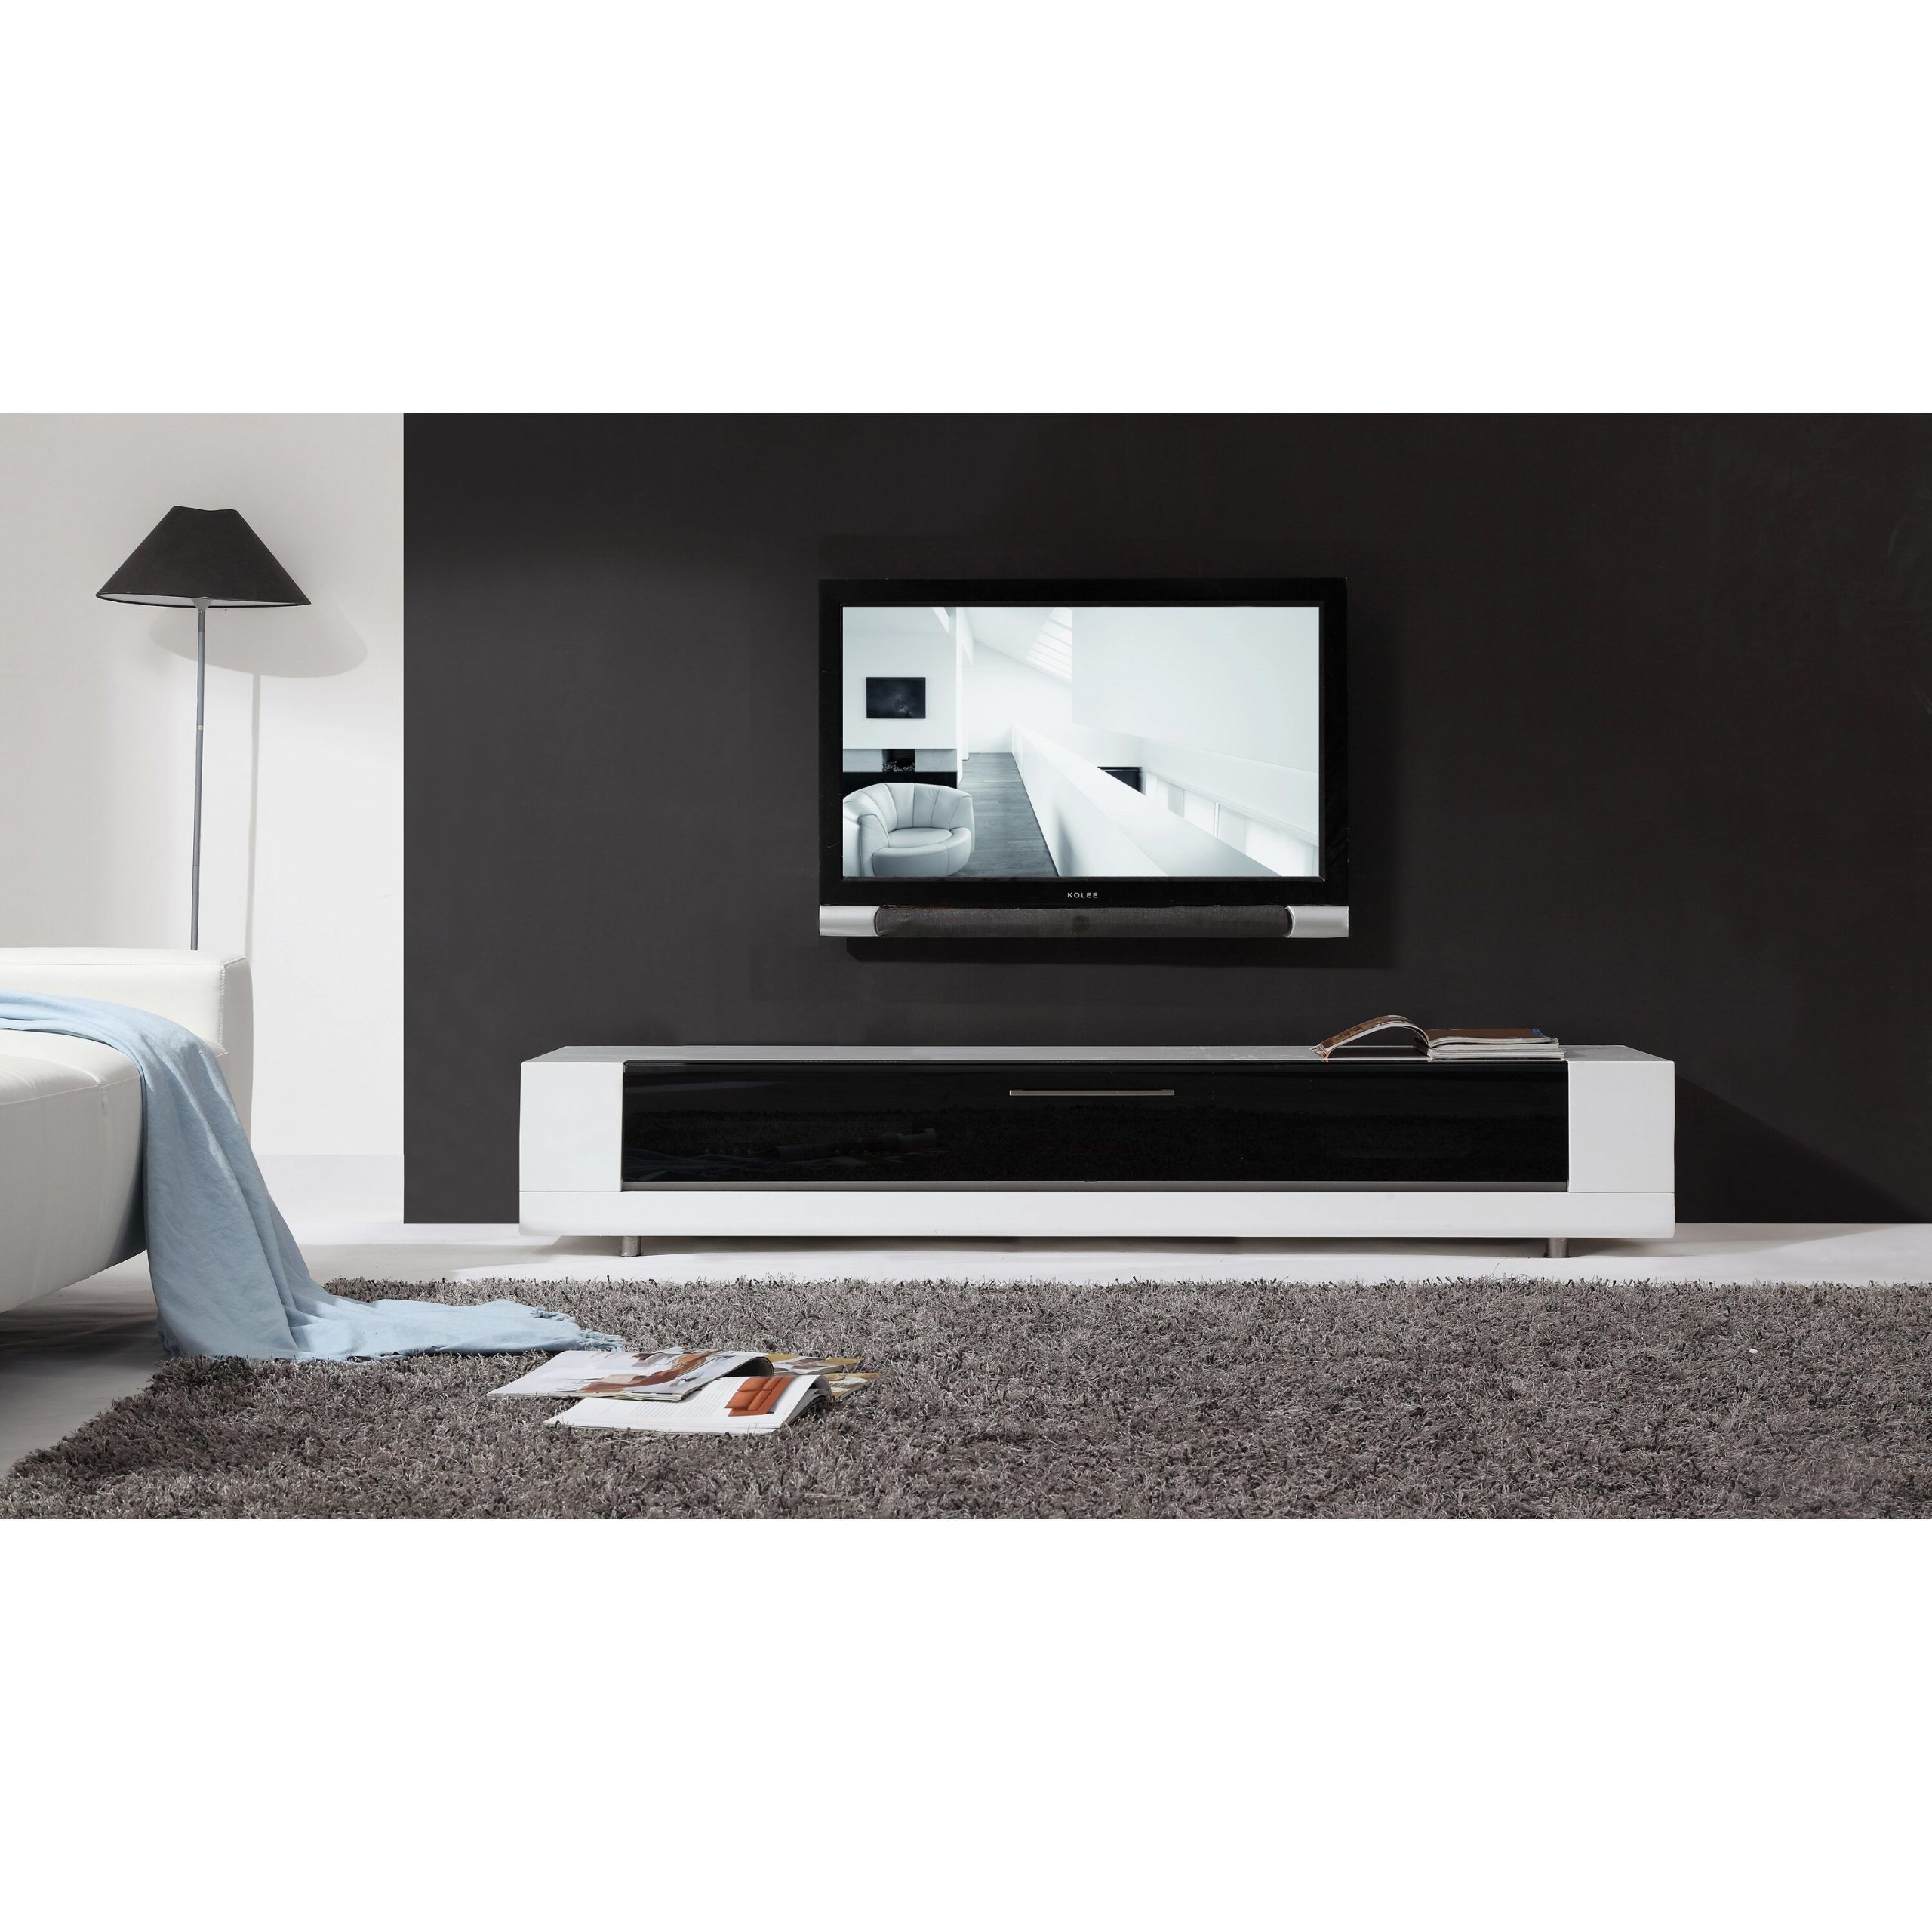 B Modern Editor Remix Tv Stand & Reviews | Wayfair Pertaining To Modern Style Tv Stands (View 5 of 15)